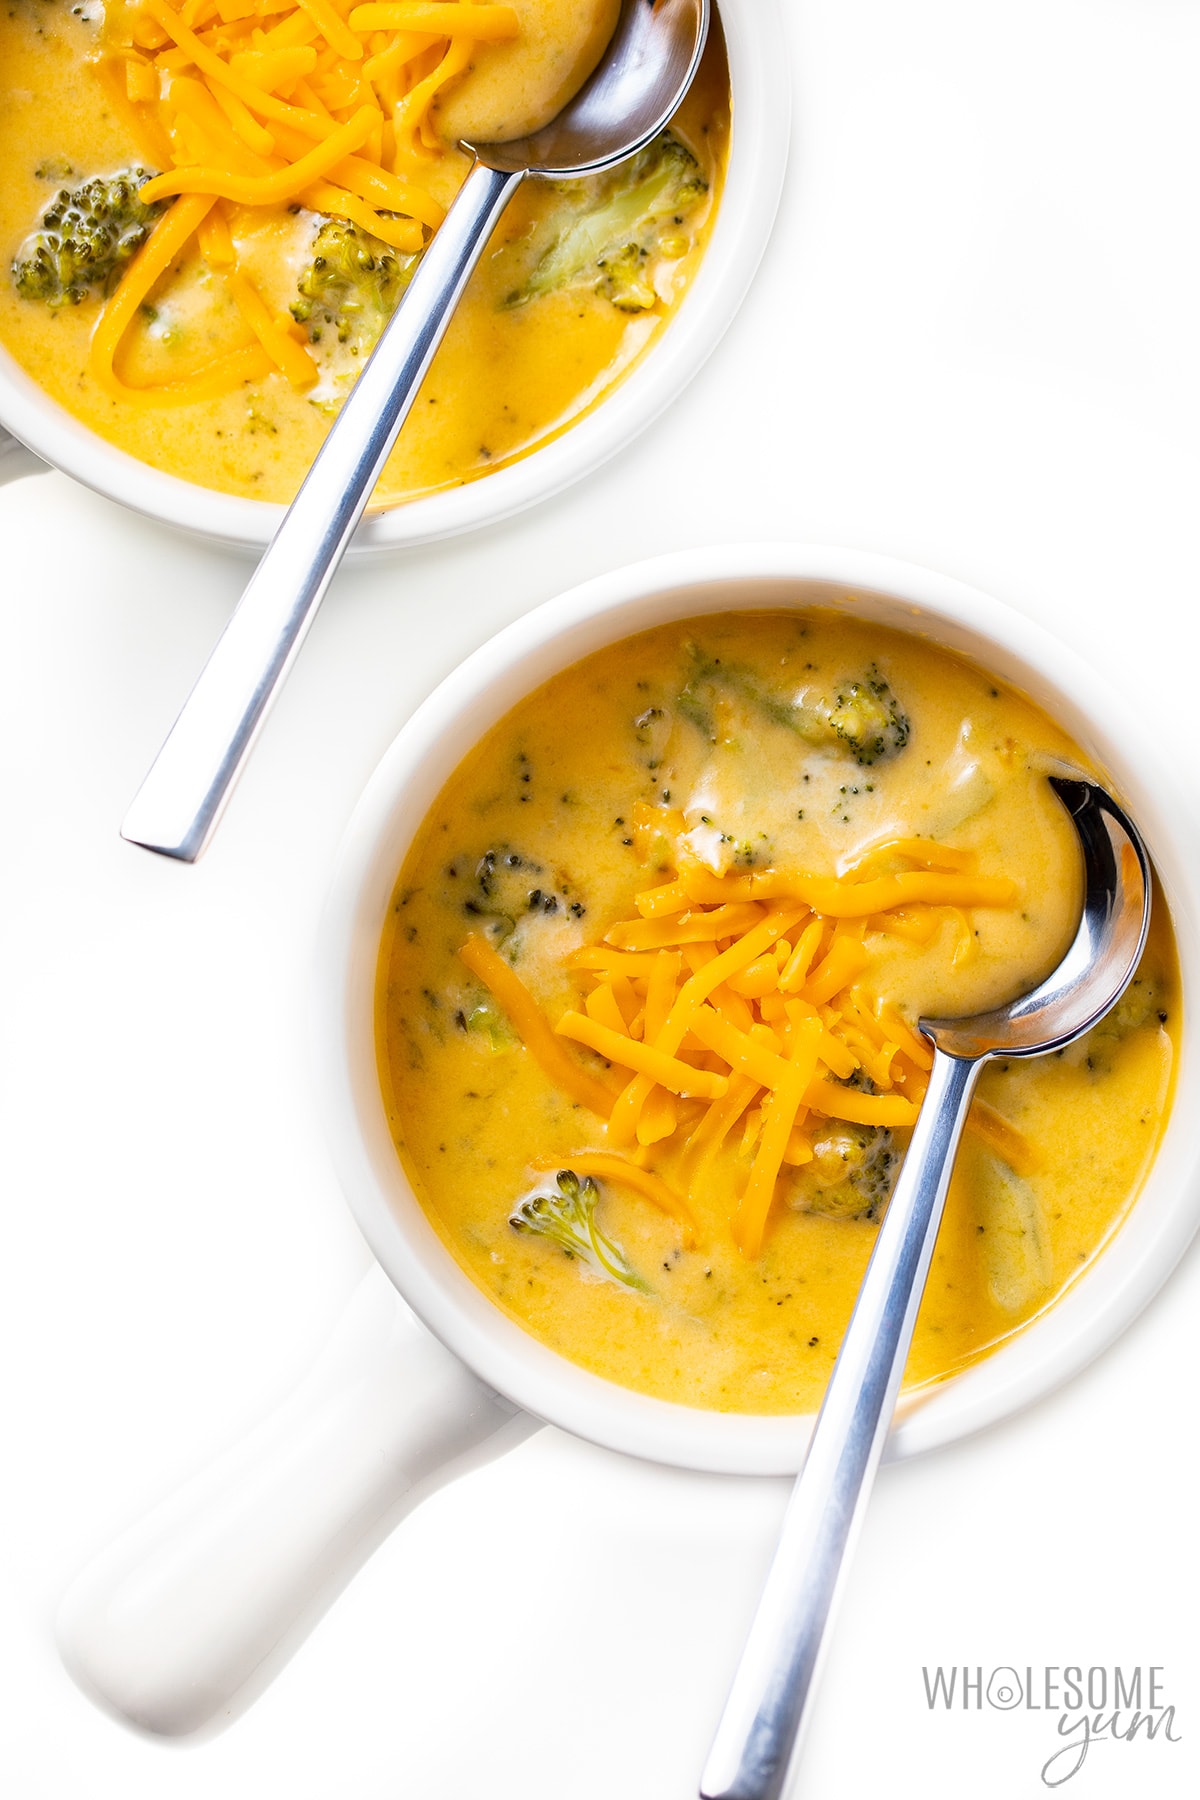 Two bowls of broccoli and cheese soup.